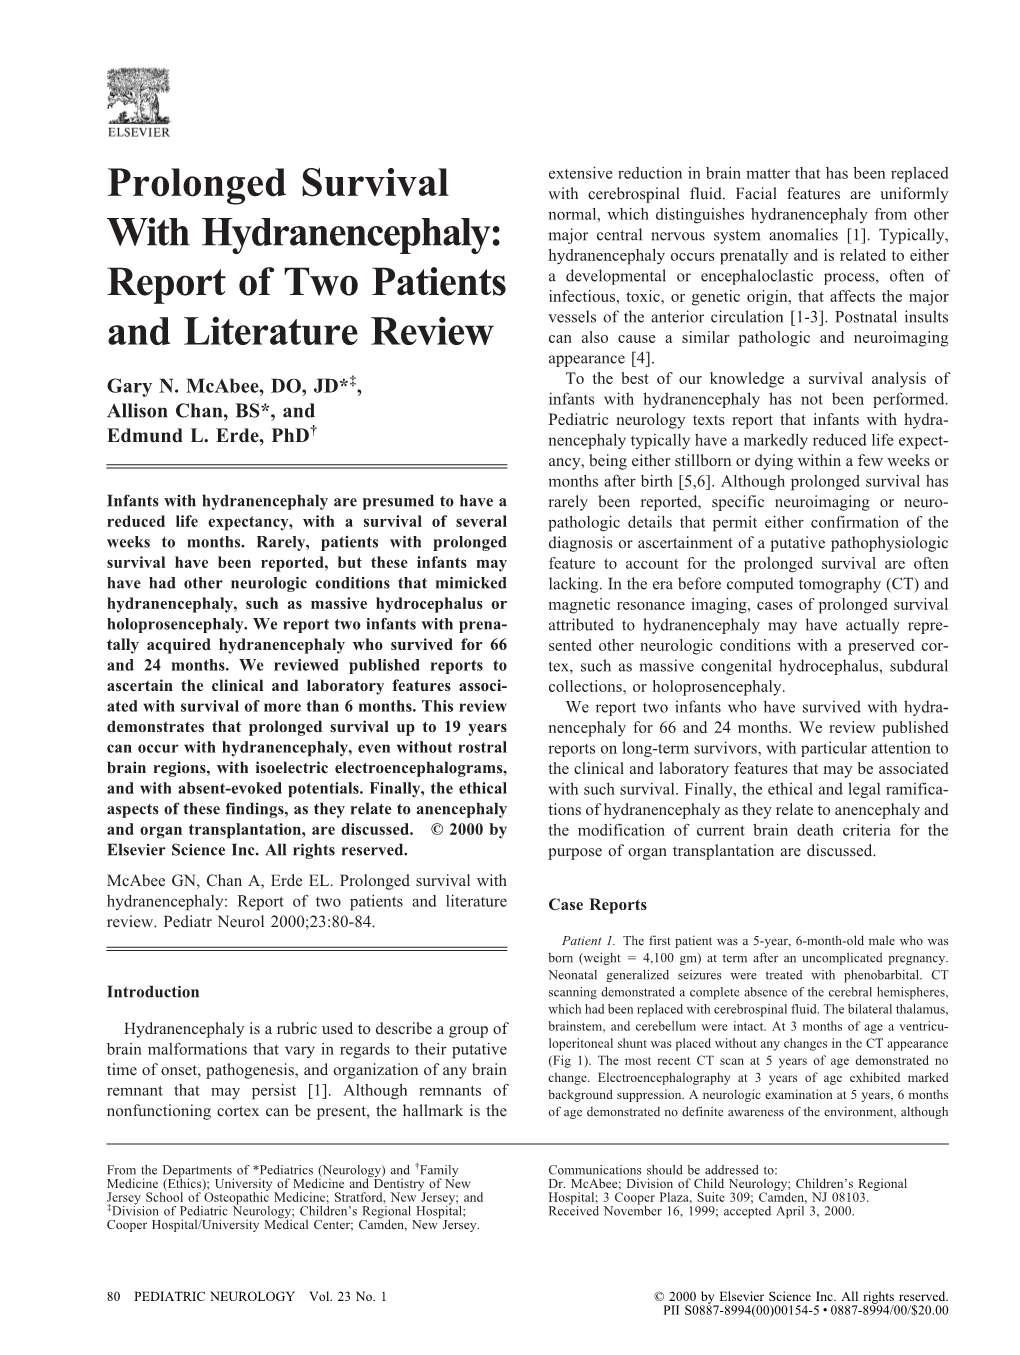 Prolonged Survival with Hydranencephaly: Report of Two Patients and Literature Case Reports Review